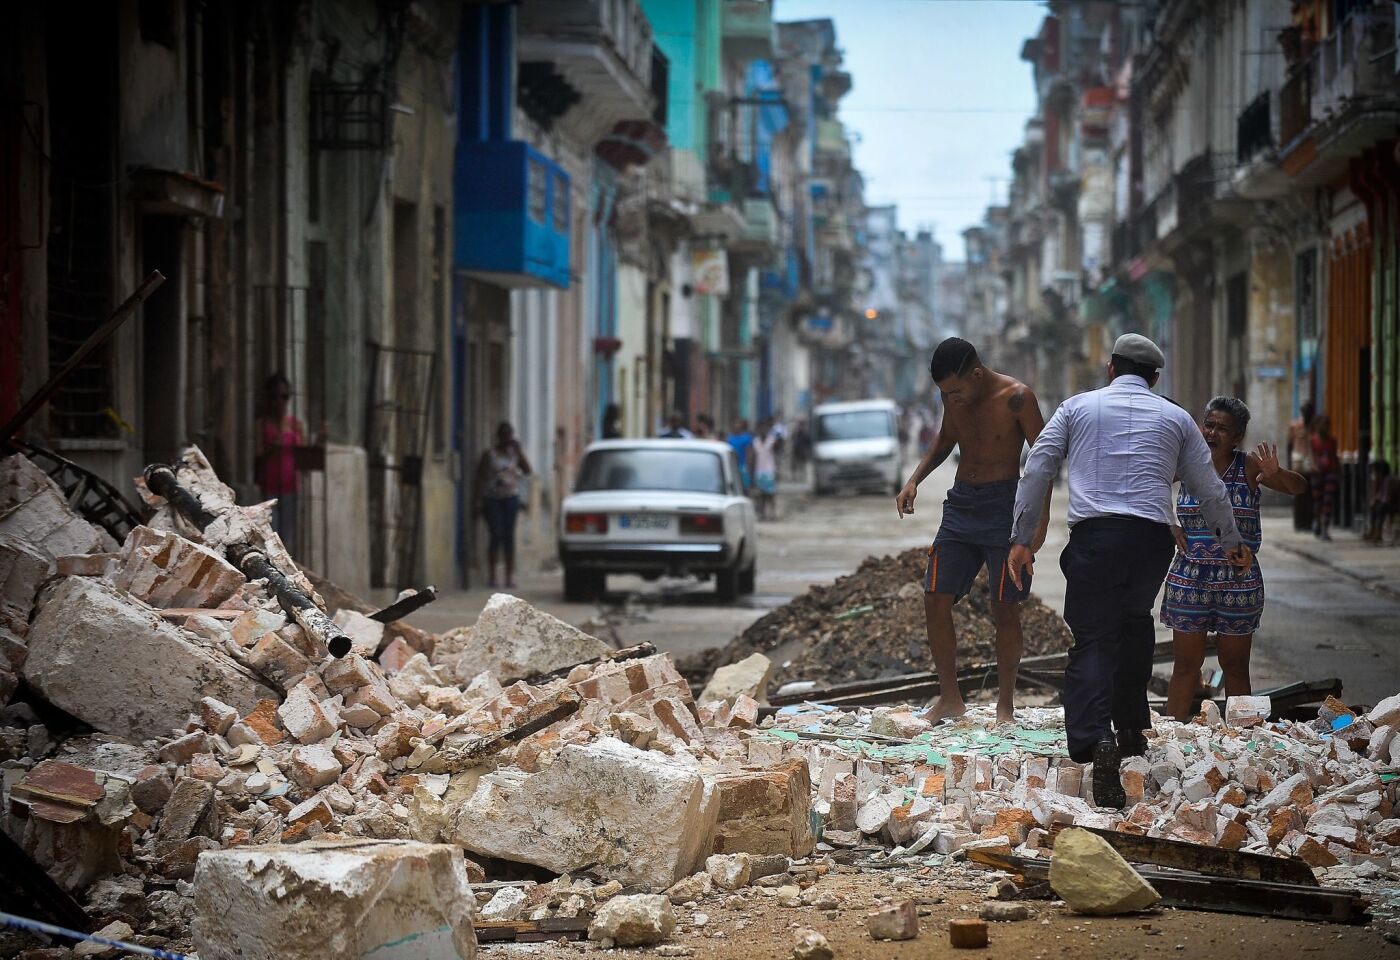 Cubans wade through the rubble from a collapsed building in Havana on Saturday.